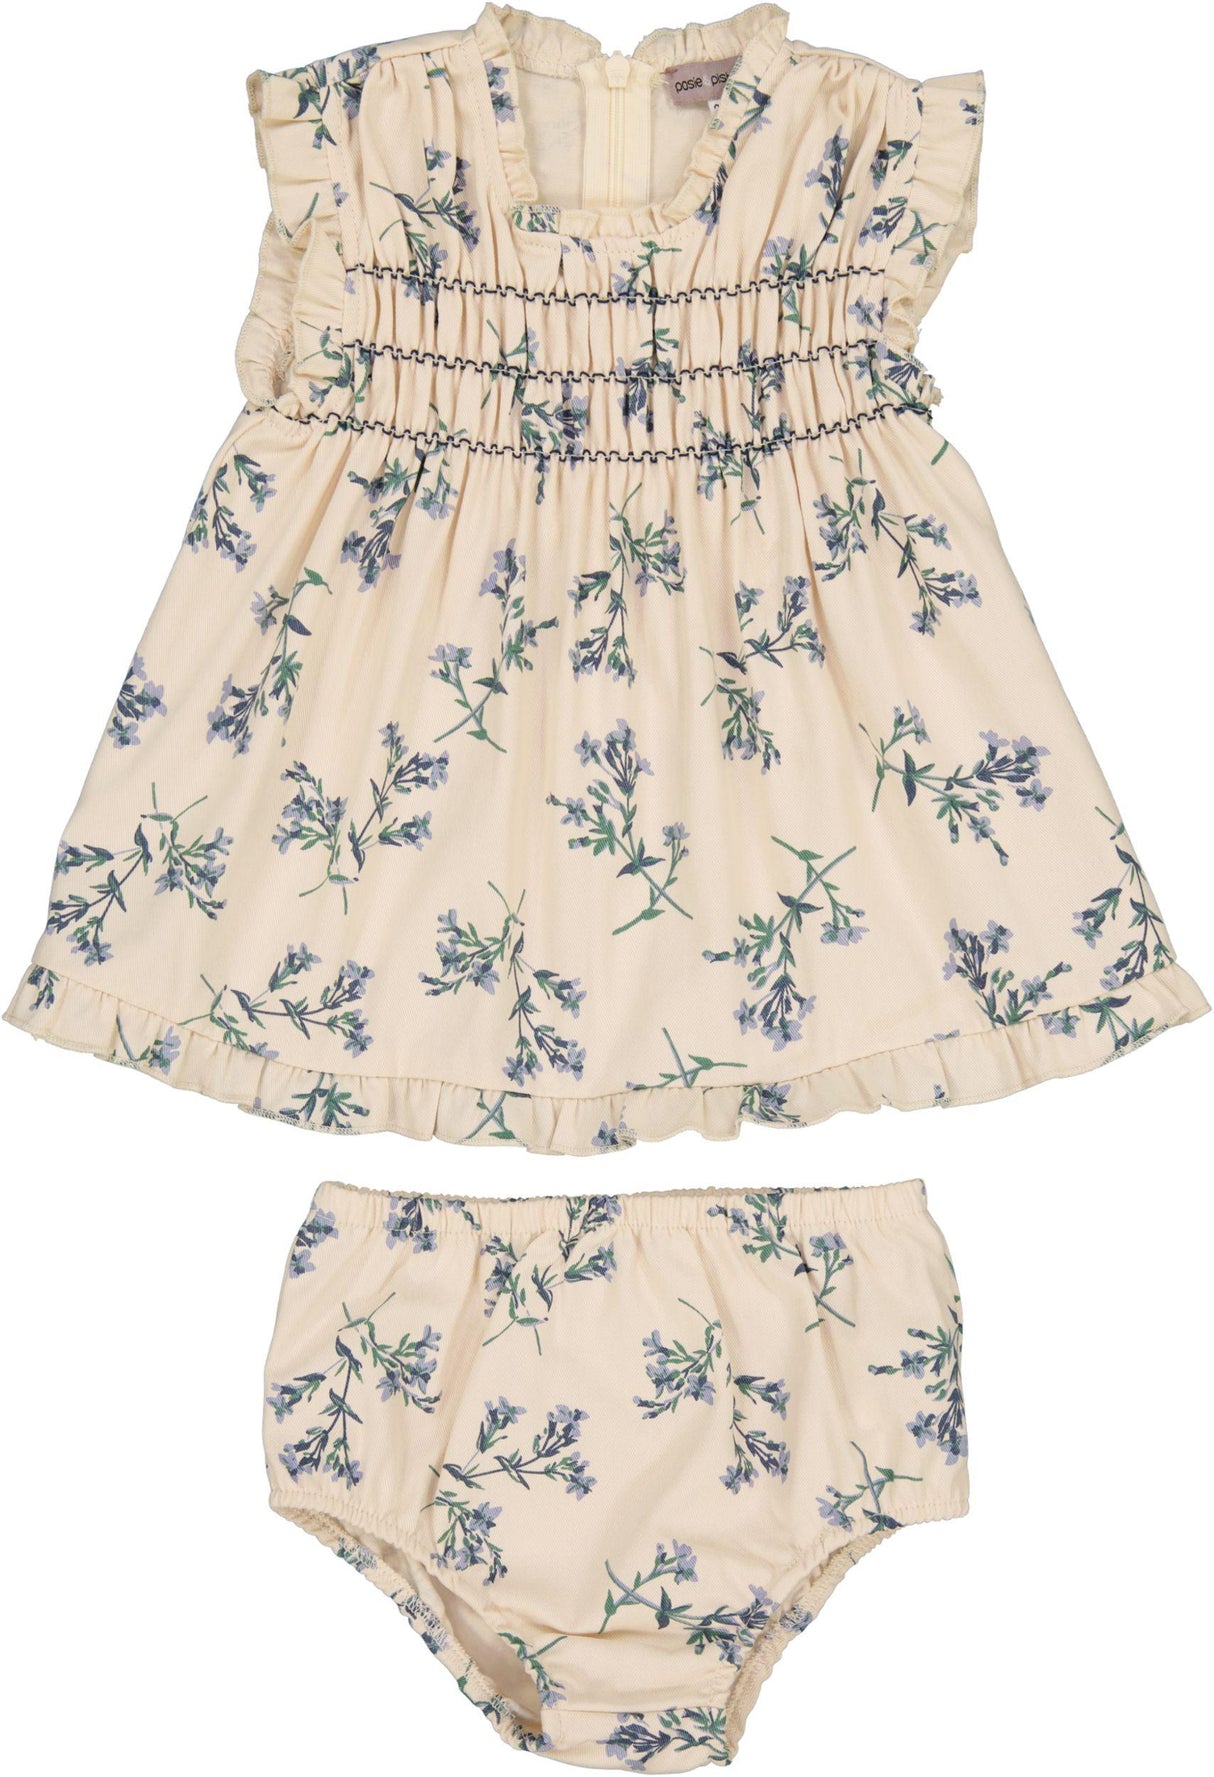 Posie & Pistachio Baby Girls Ruched Floral Outfit - SB4CY2325